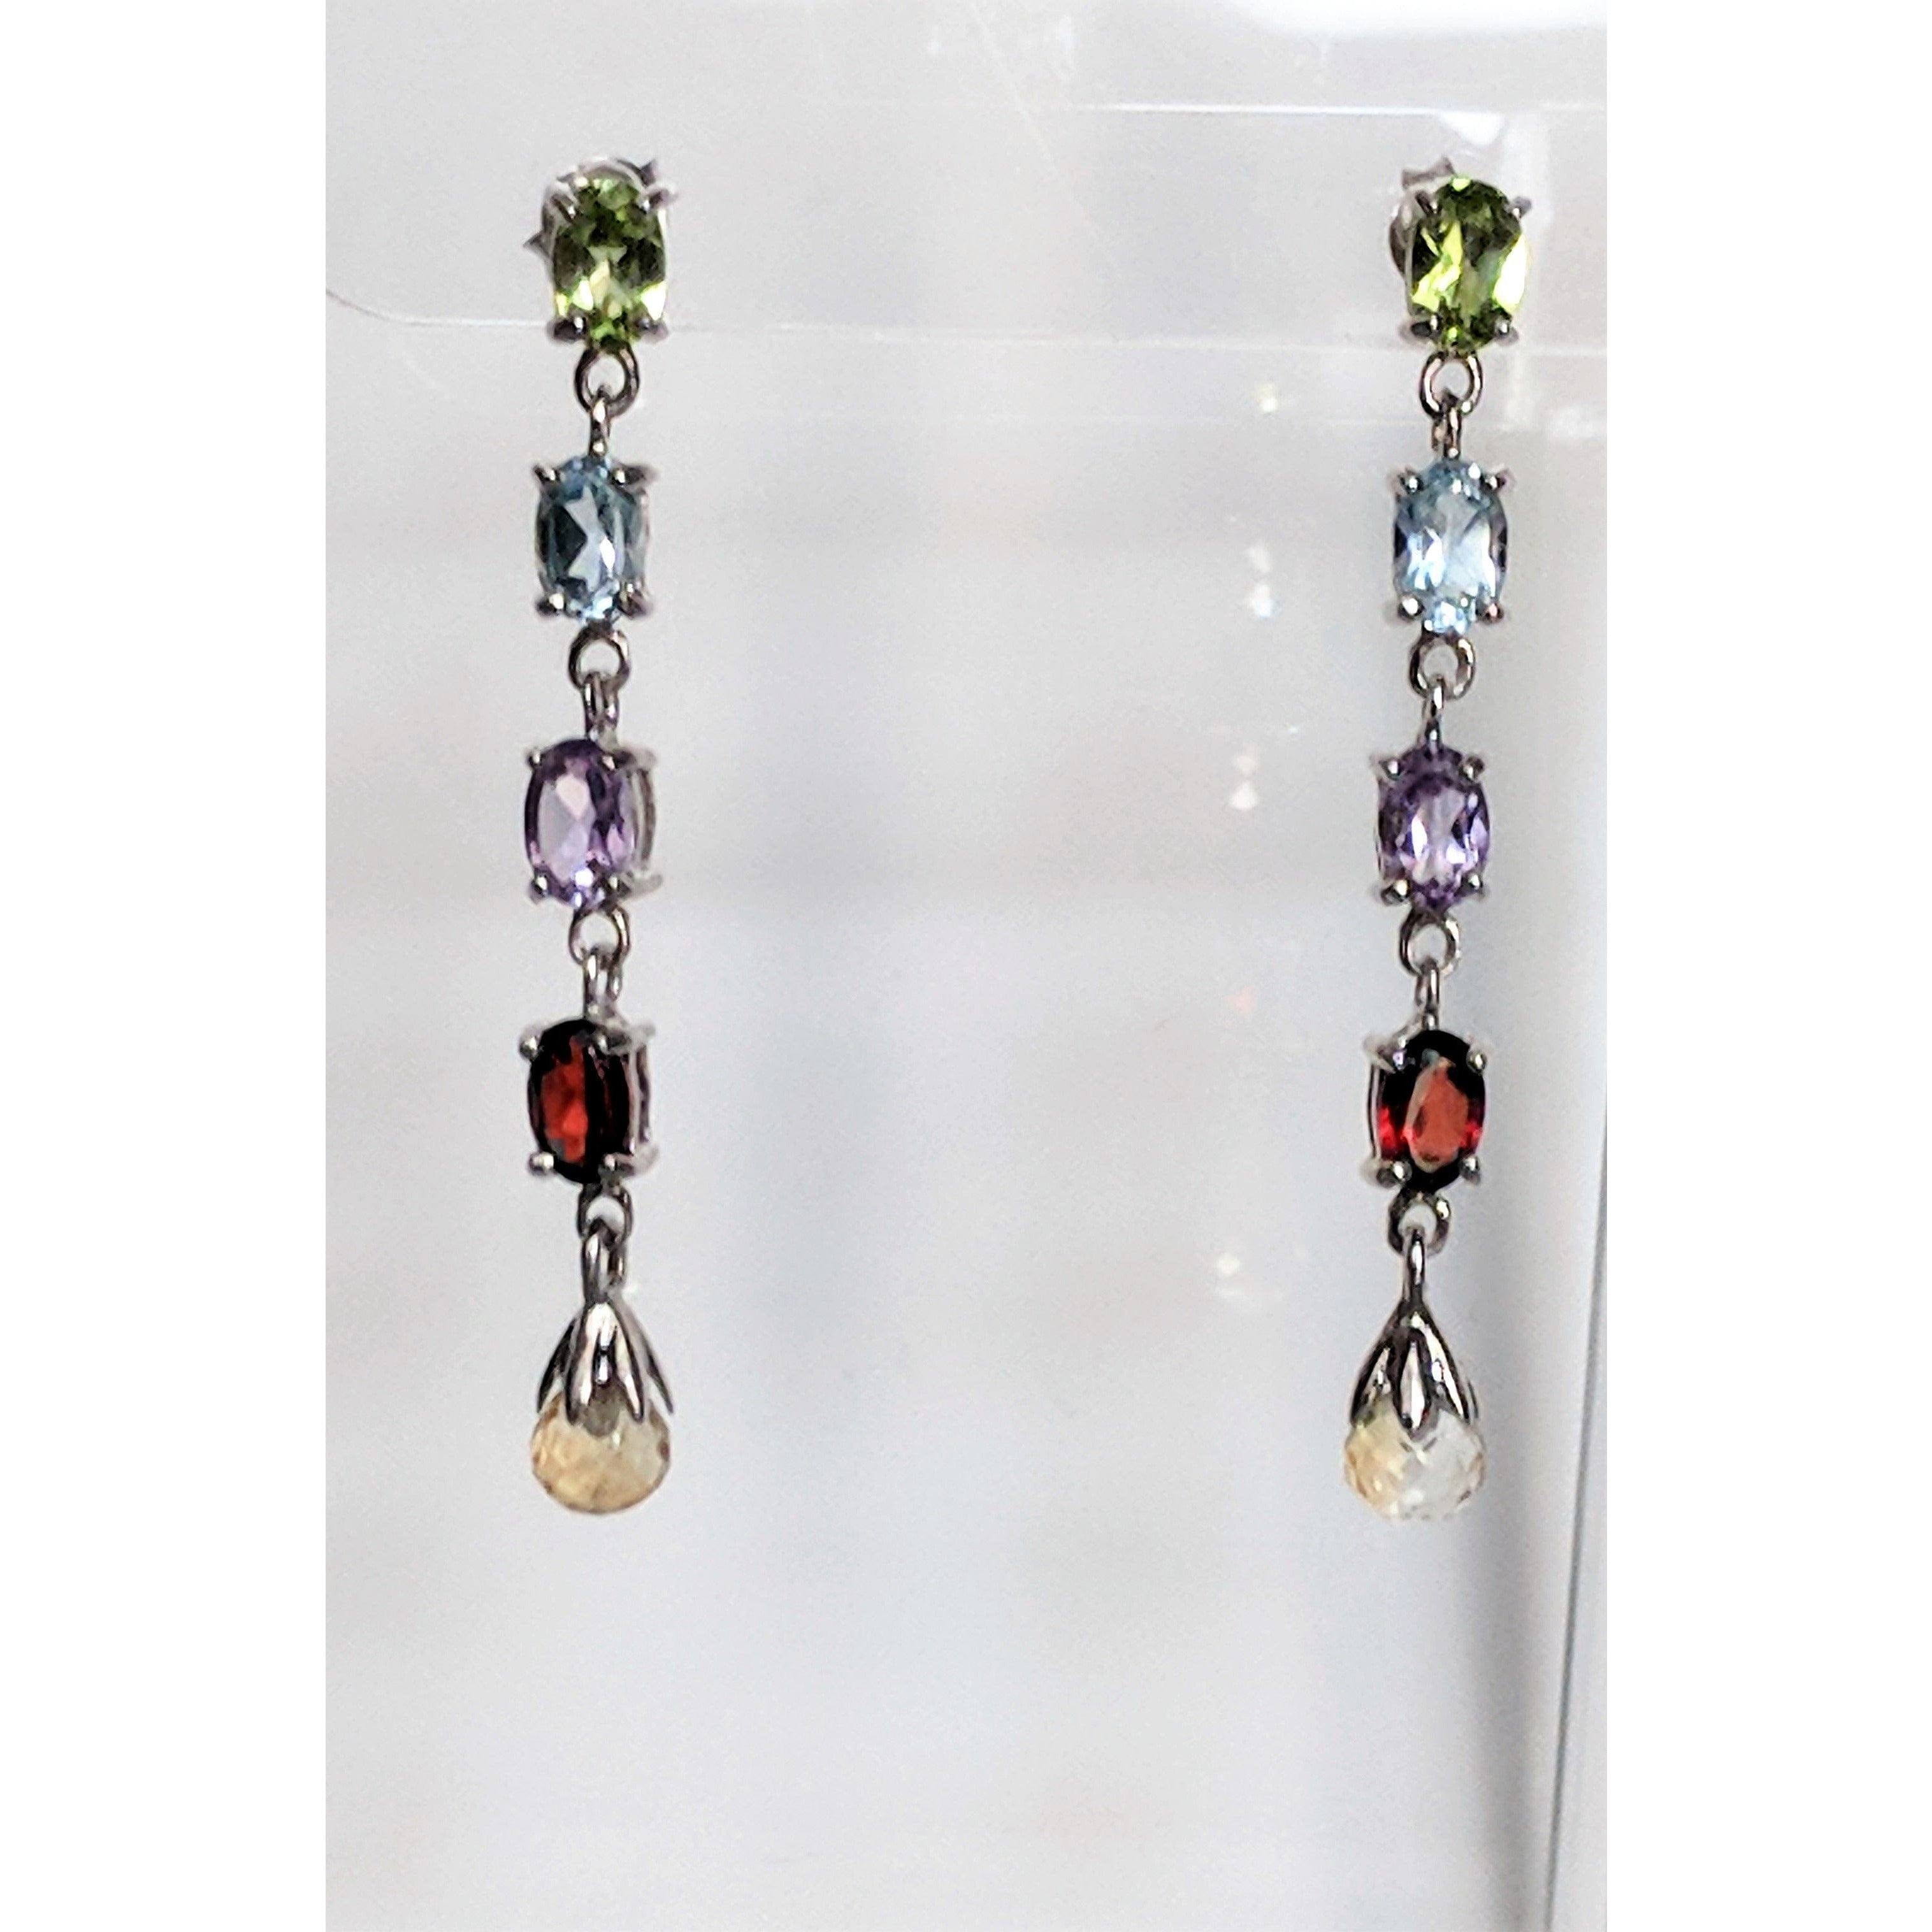 Multi Gemstone Earrings, the most GORGEOUS ever! Amethyst, topaz, garnet, citrine, peridot magnificent! - The Pink Pigs, A Compassionate Boutique